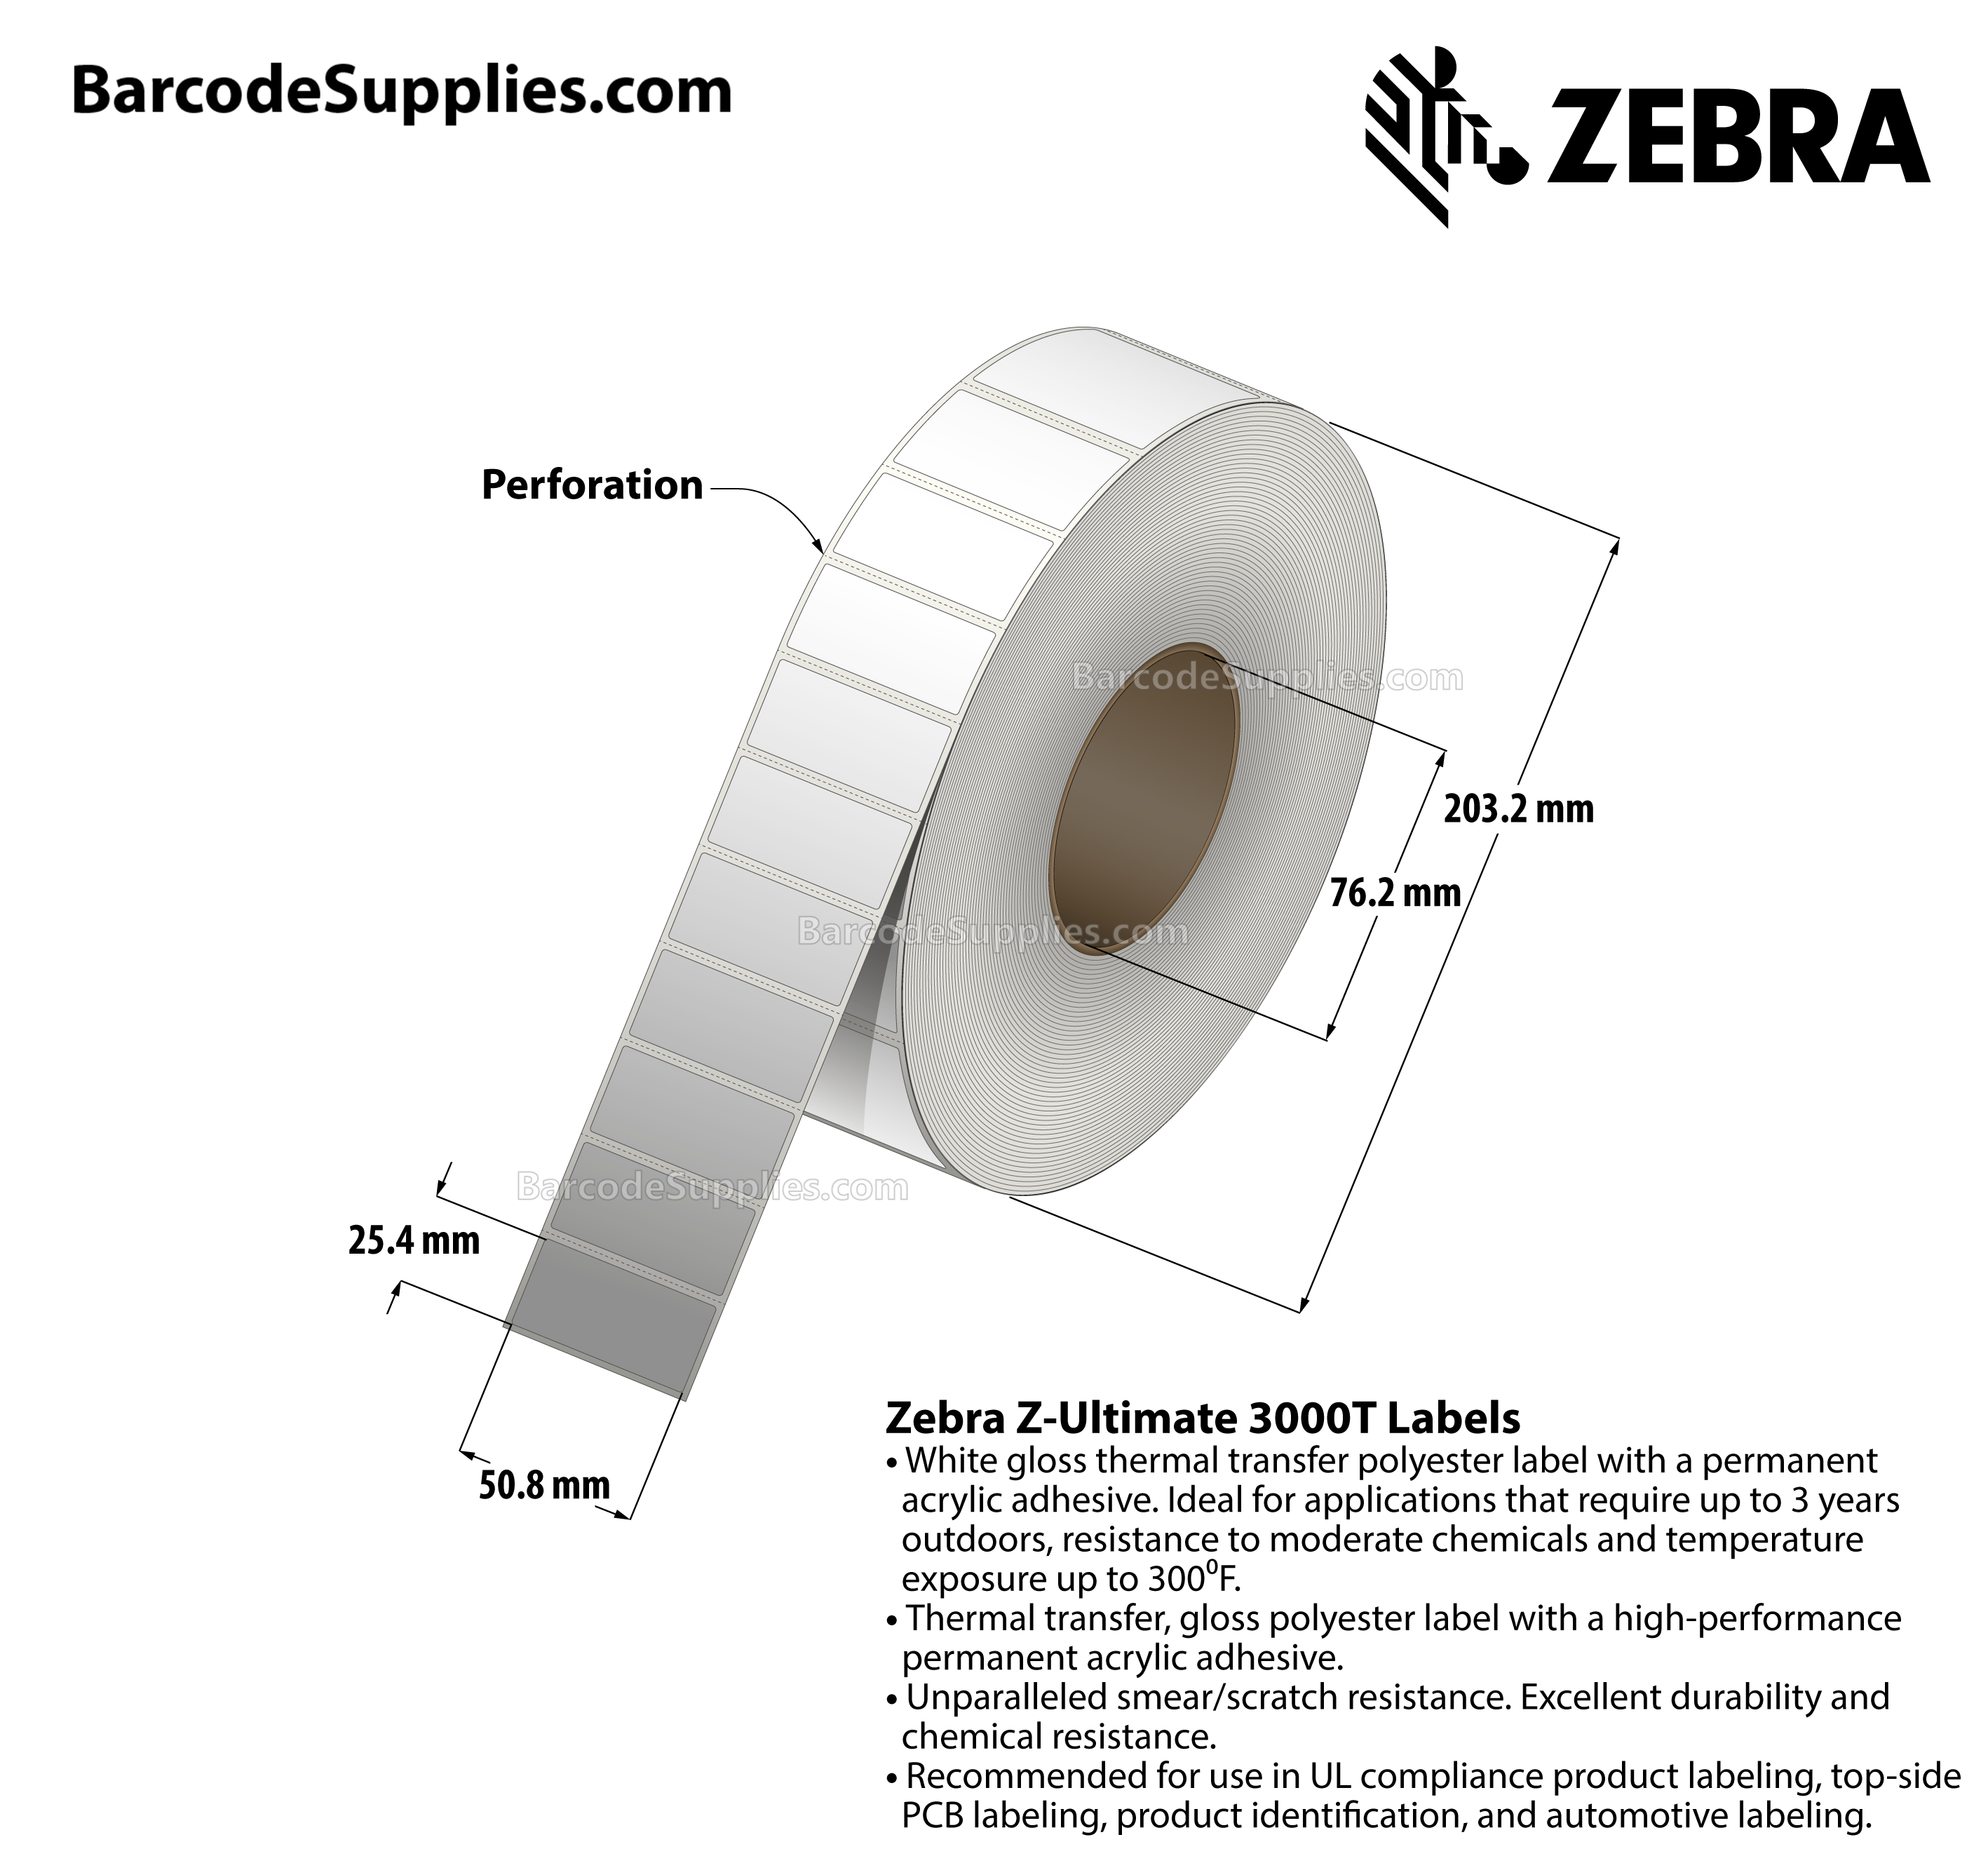 Products 2 x 1 Thermal Transfer White Z-Ultimate 3000T Labels With Permanent Adhesive - Perforated - 5570 Labels Per Roll - Carton Of 4 Rolls - 22280 Labels Total - MPN: 10011697